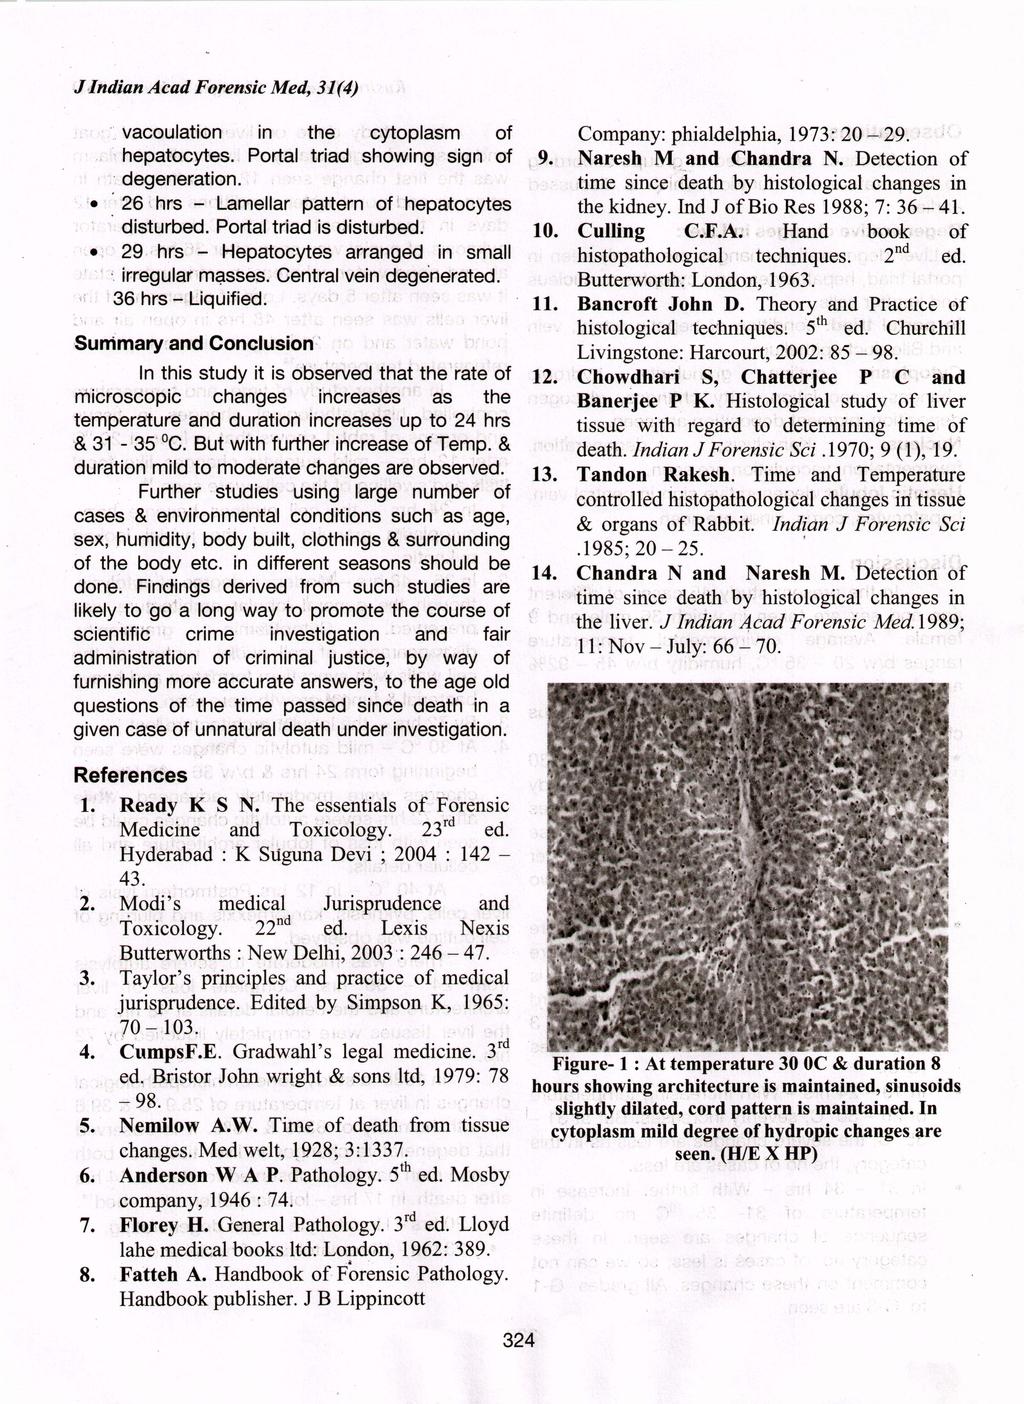 J'Indian Acad Forensic Med 31(4) vacoulatlon in the :cytoplasm of Company: phialdelphia 1973: 20-29 ' hepatocytes Portal' triad showing sign of \9 Naresh-M and Chandra N Detection of degeneration